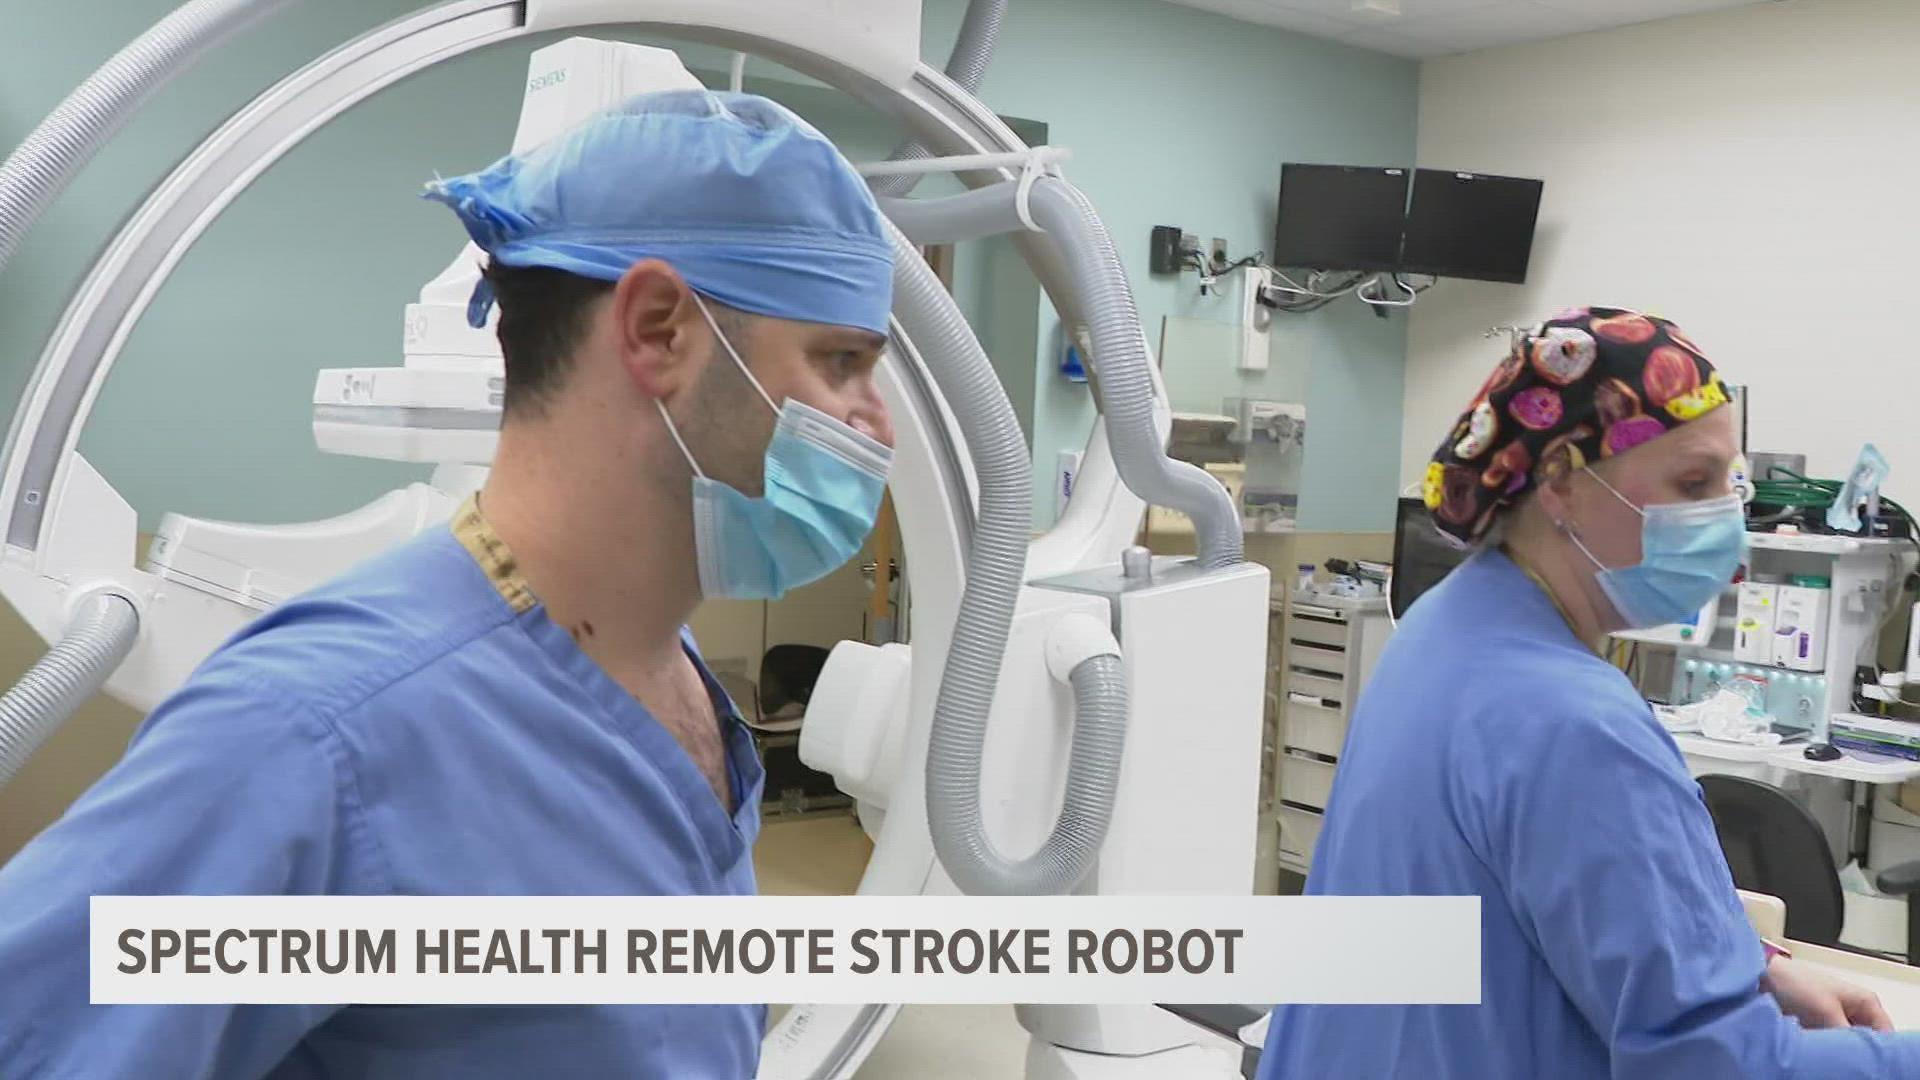 Spectrum Health's new stroke technology could lead to remote surgery for stroke patients.